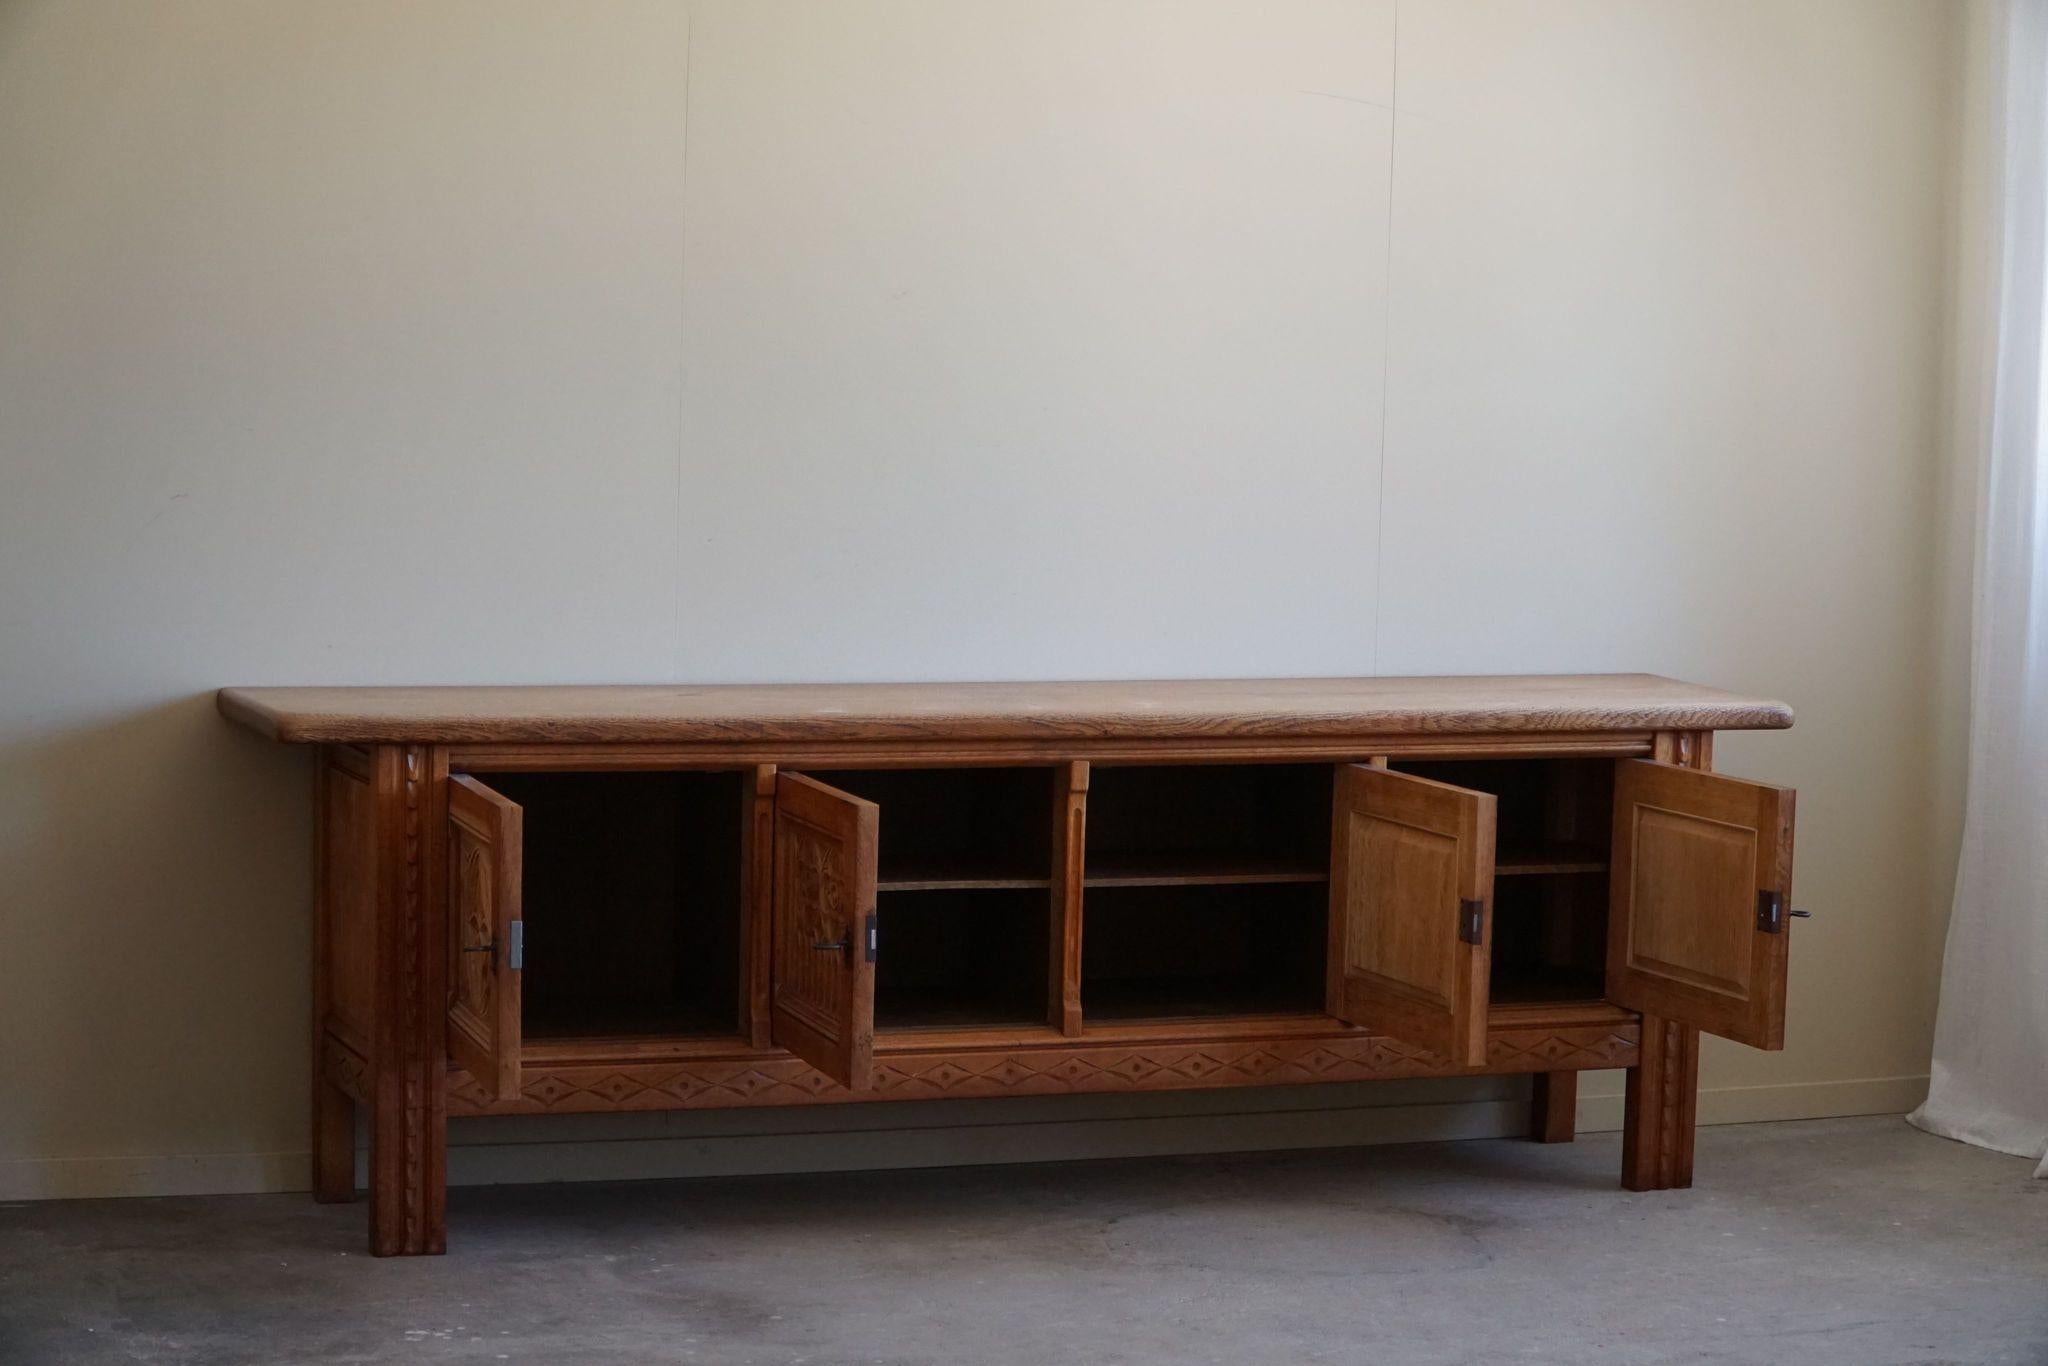 Mid Century Modern Sideboard in Oak, Handcrafted by a Danish Cabinetmaker, 1950s For Sale 1